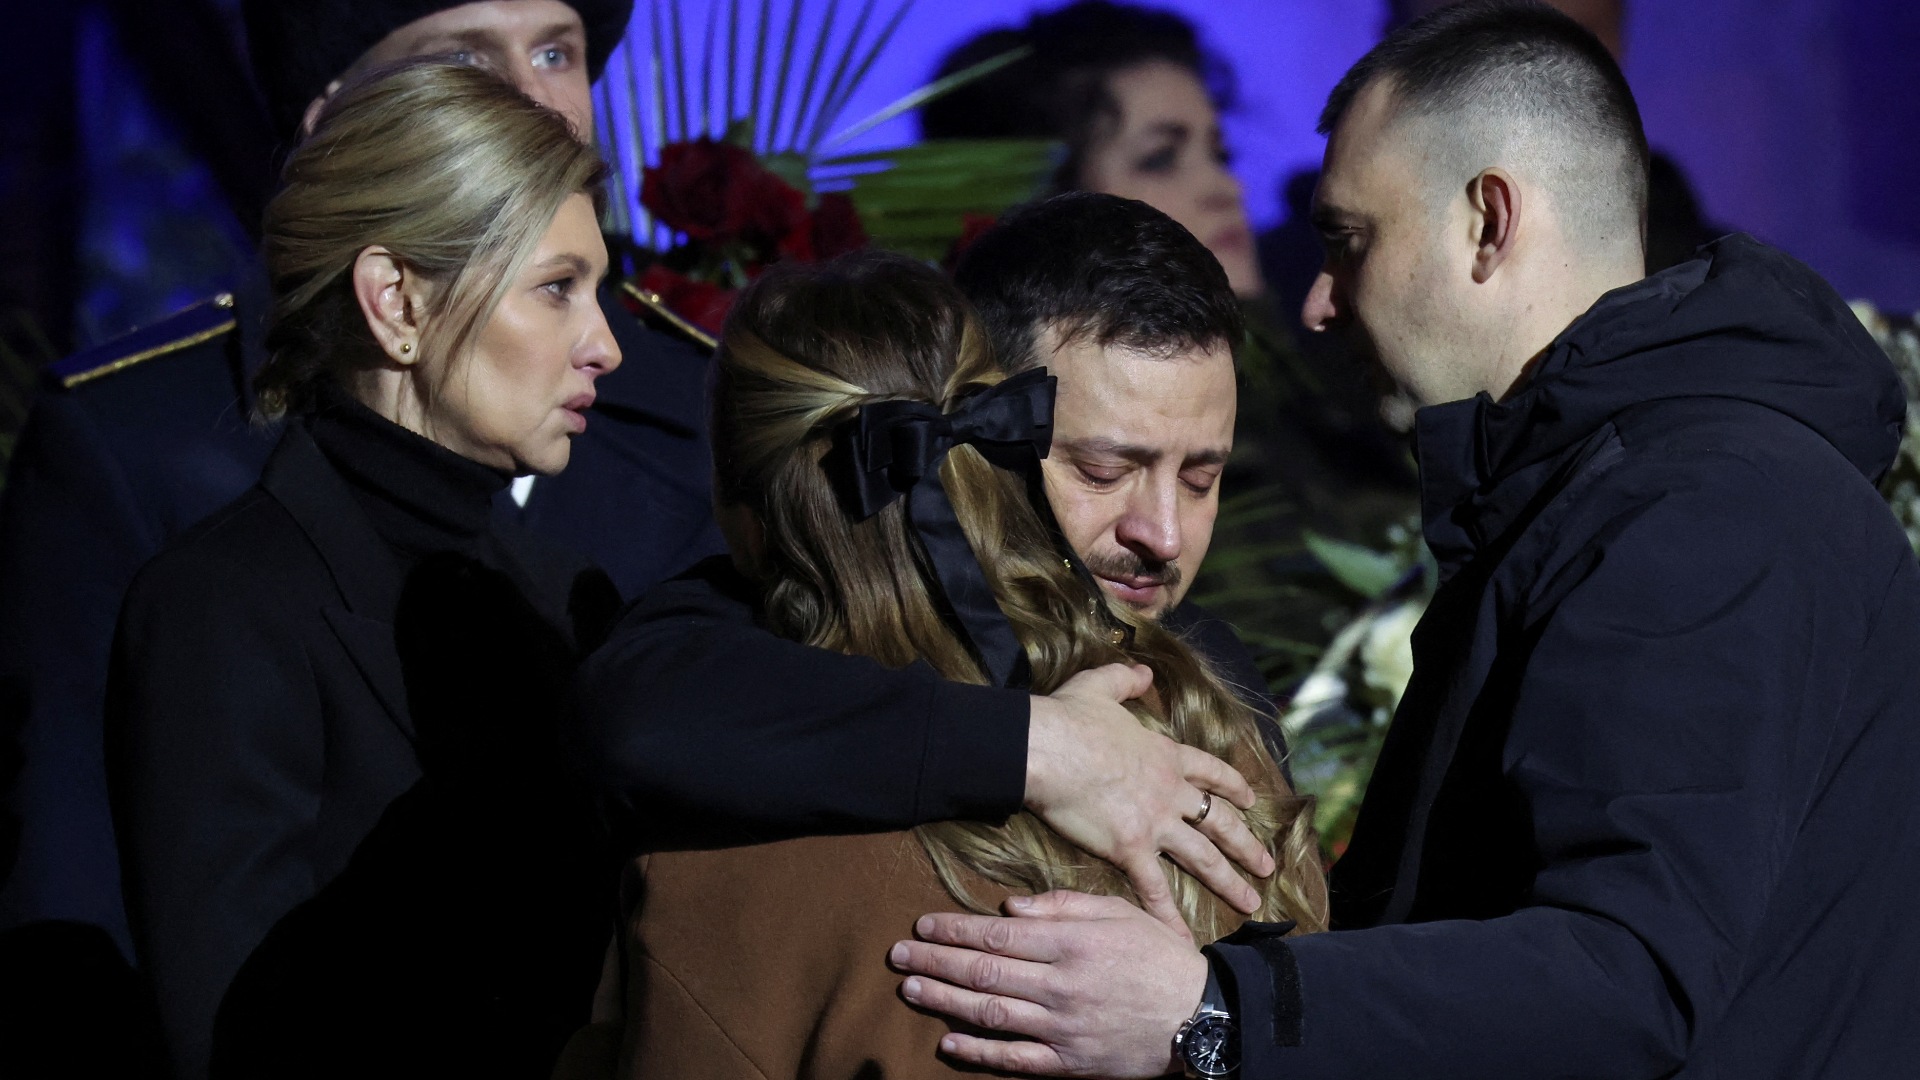 Volodymyr Zelenskyy and first lady Olena Zelenska attend a memorial ceremony for those who died in the Kyiv helicopter crash. /Nacho Doce/Reuters